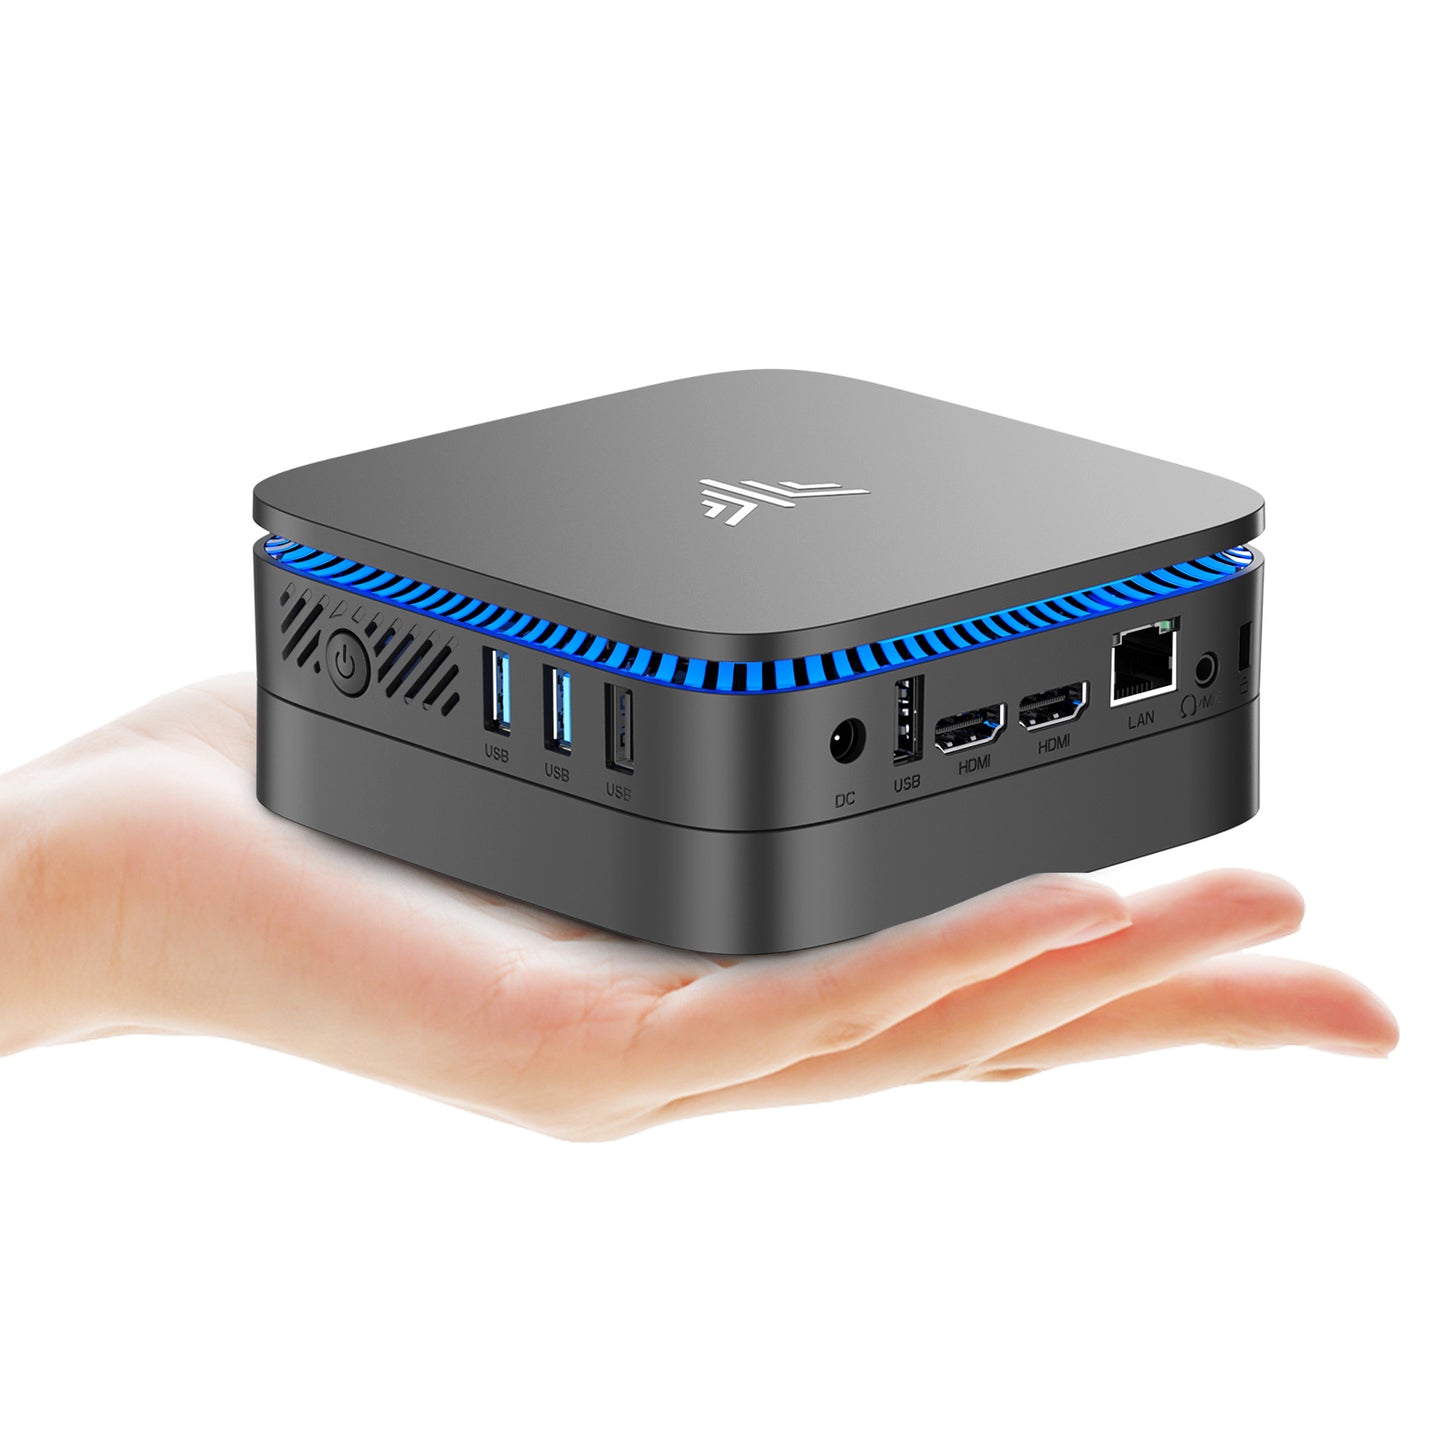 KAMRUI AK1PLUS Mini PC with Intel Alder Lake N97(up to 3.60 GHz), 16GB RAM 512GB ROM Small Desktop Computer, 4K UHD Mini Computers Support WiFi 6 BT5.2 Dual HDMI LAN on Business Home Office Family-NAS